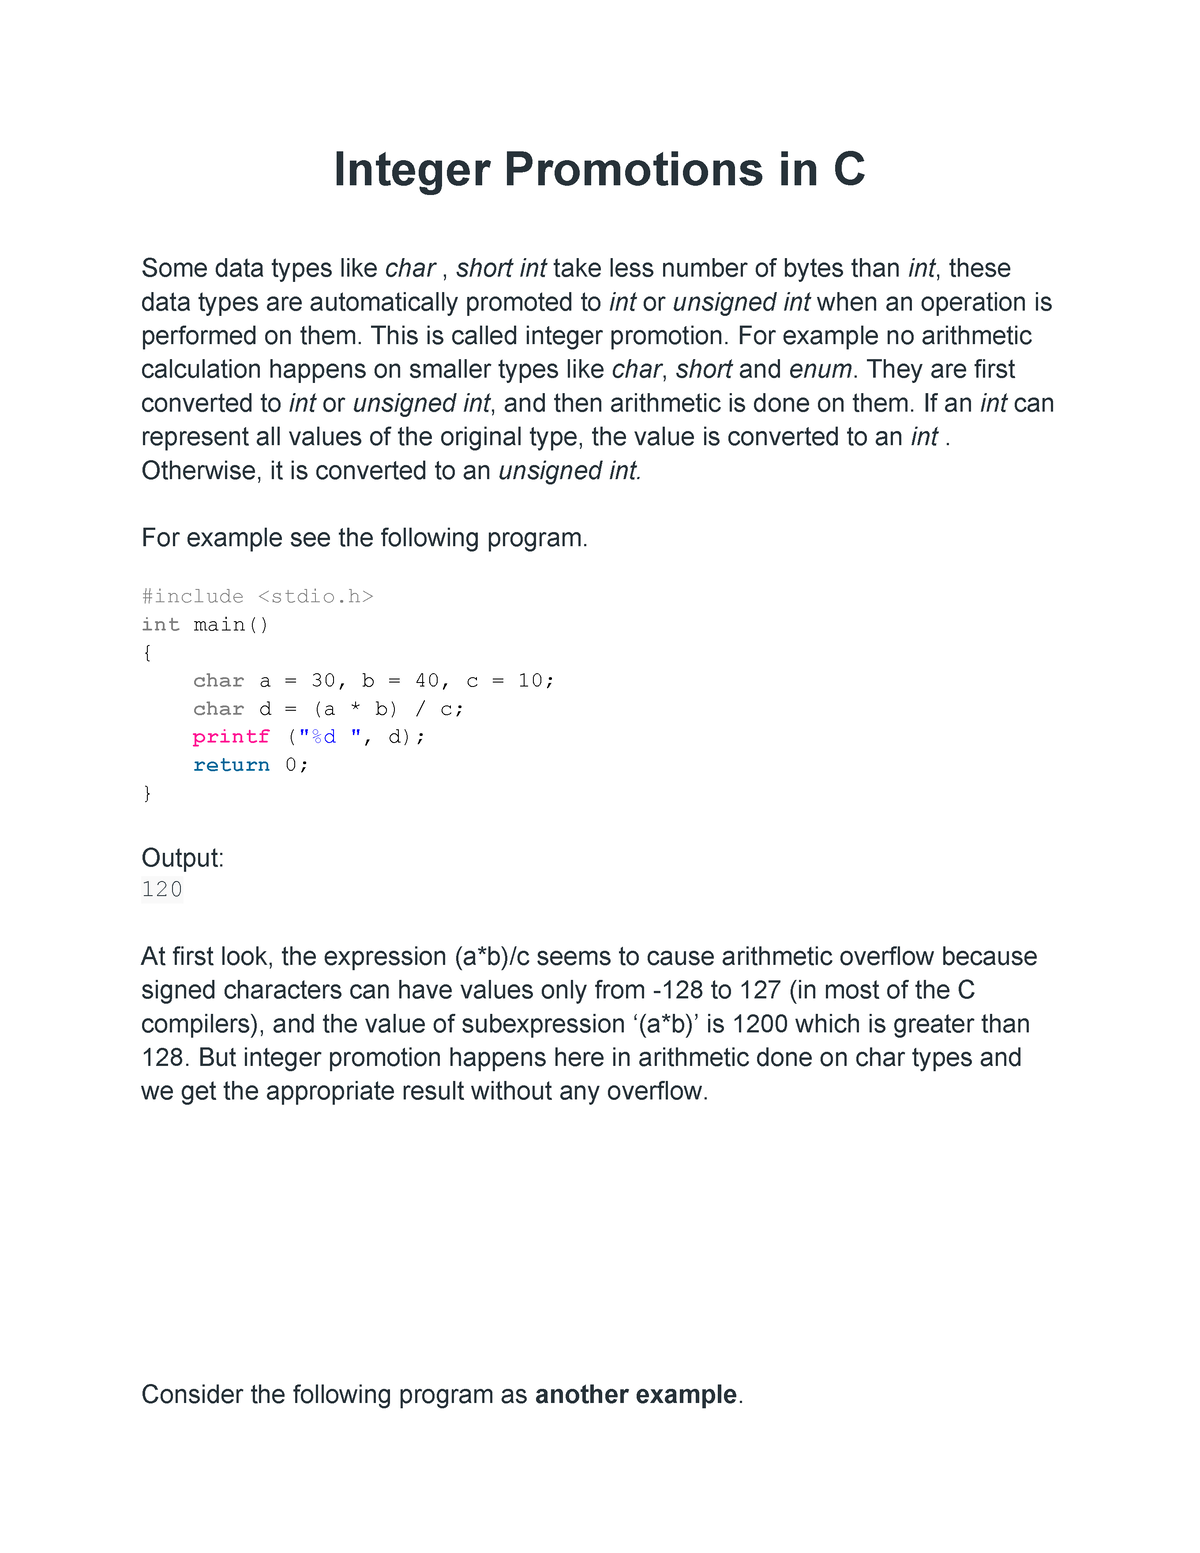 integer-promotions-in-c-this-is-called-integer-promotion-for-example